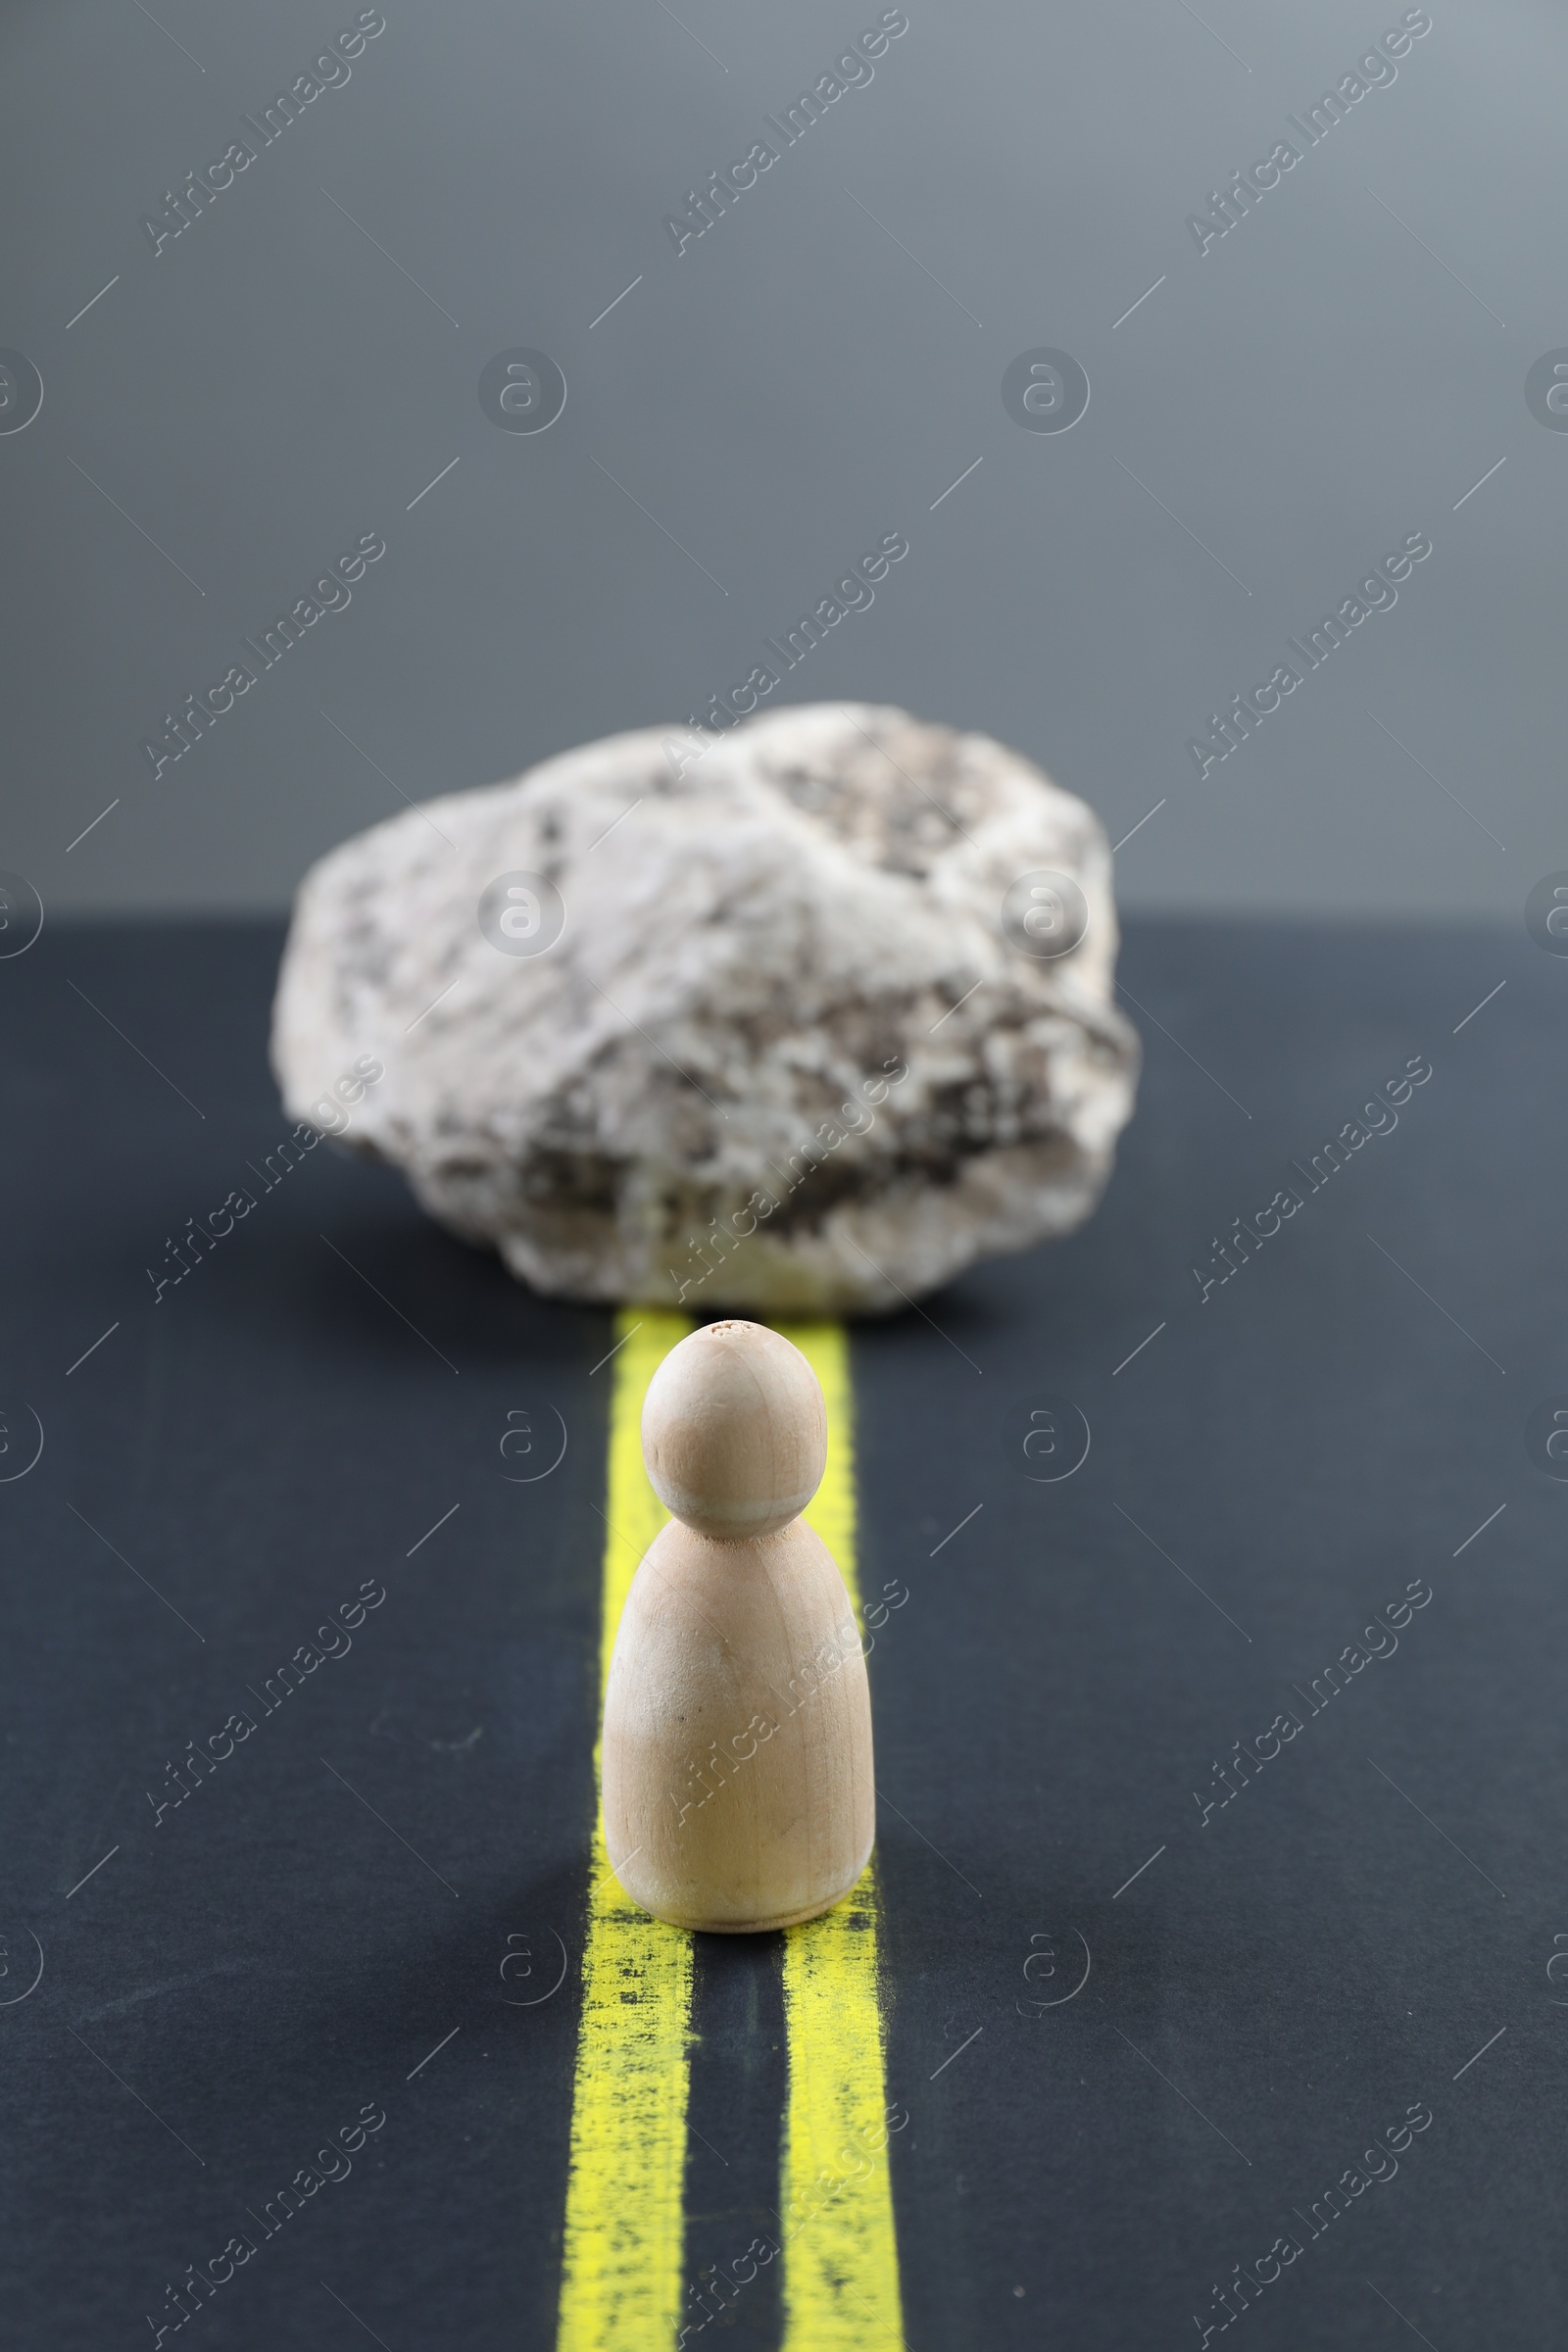 Photo of Overcoming barries for development and success. Wooden human figure in front of stone on road